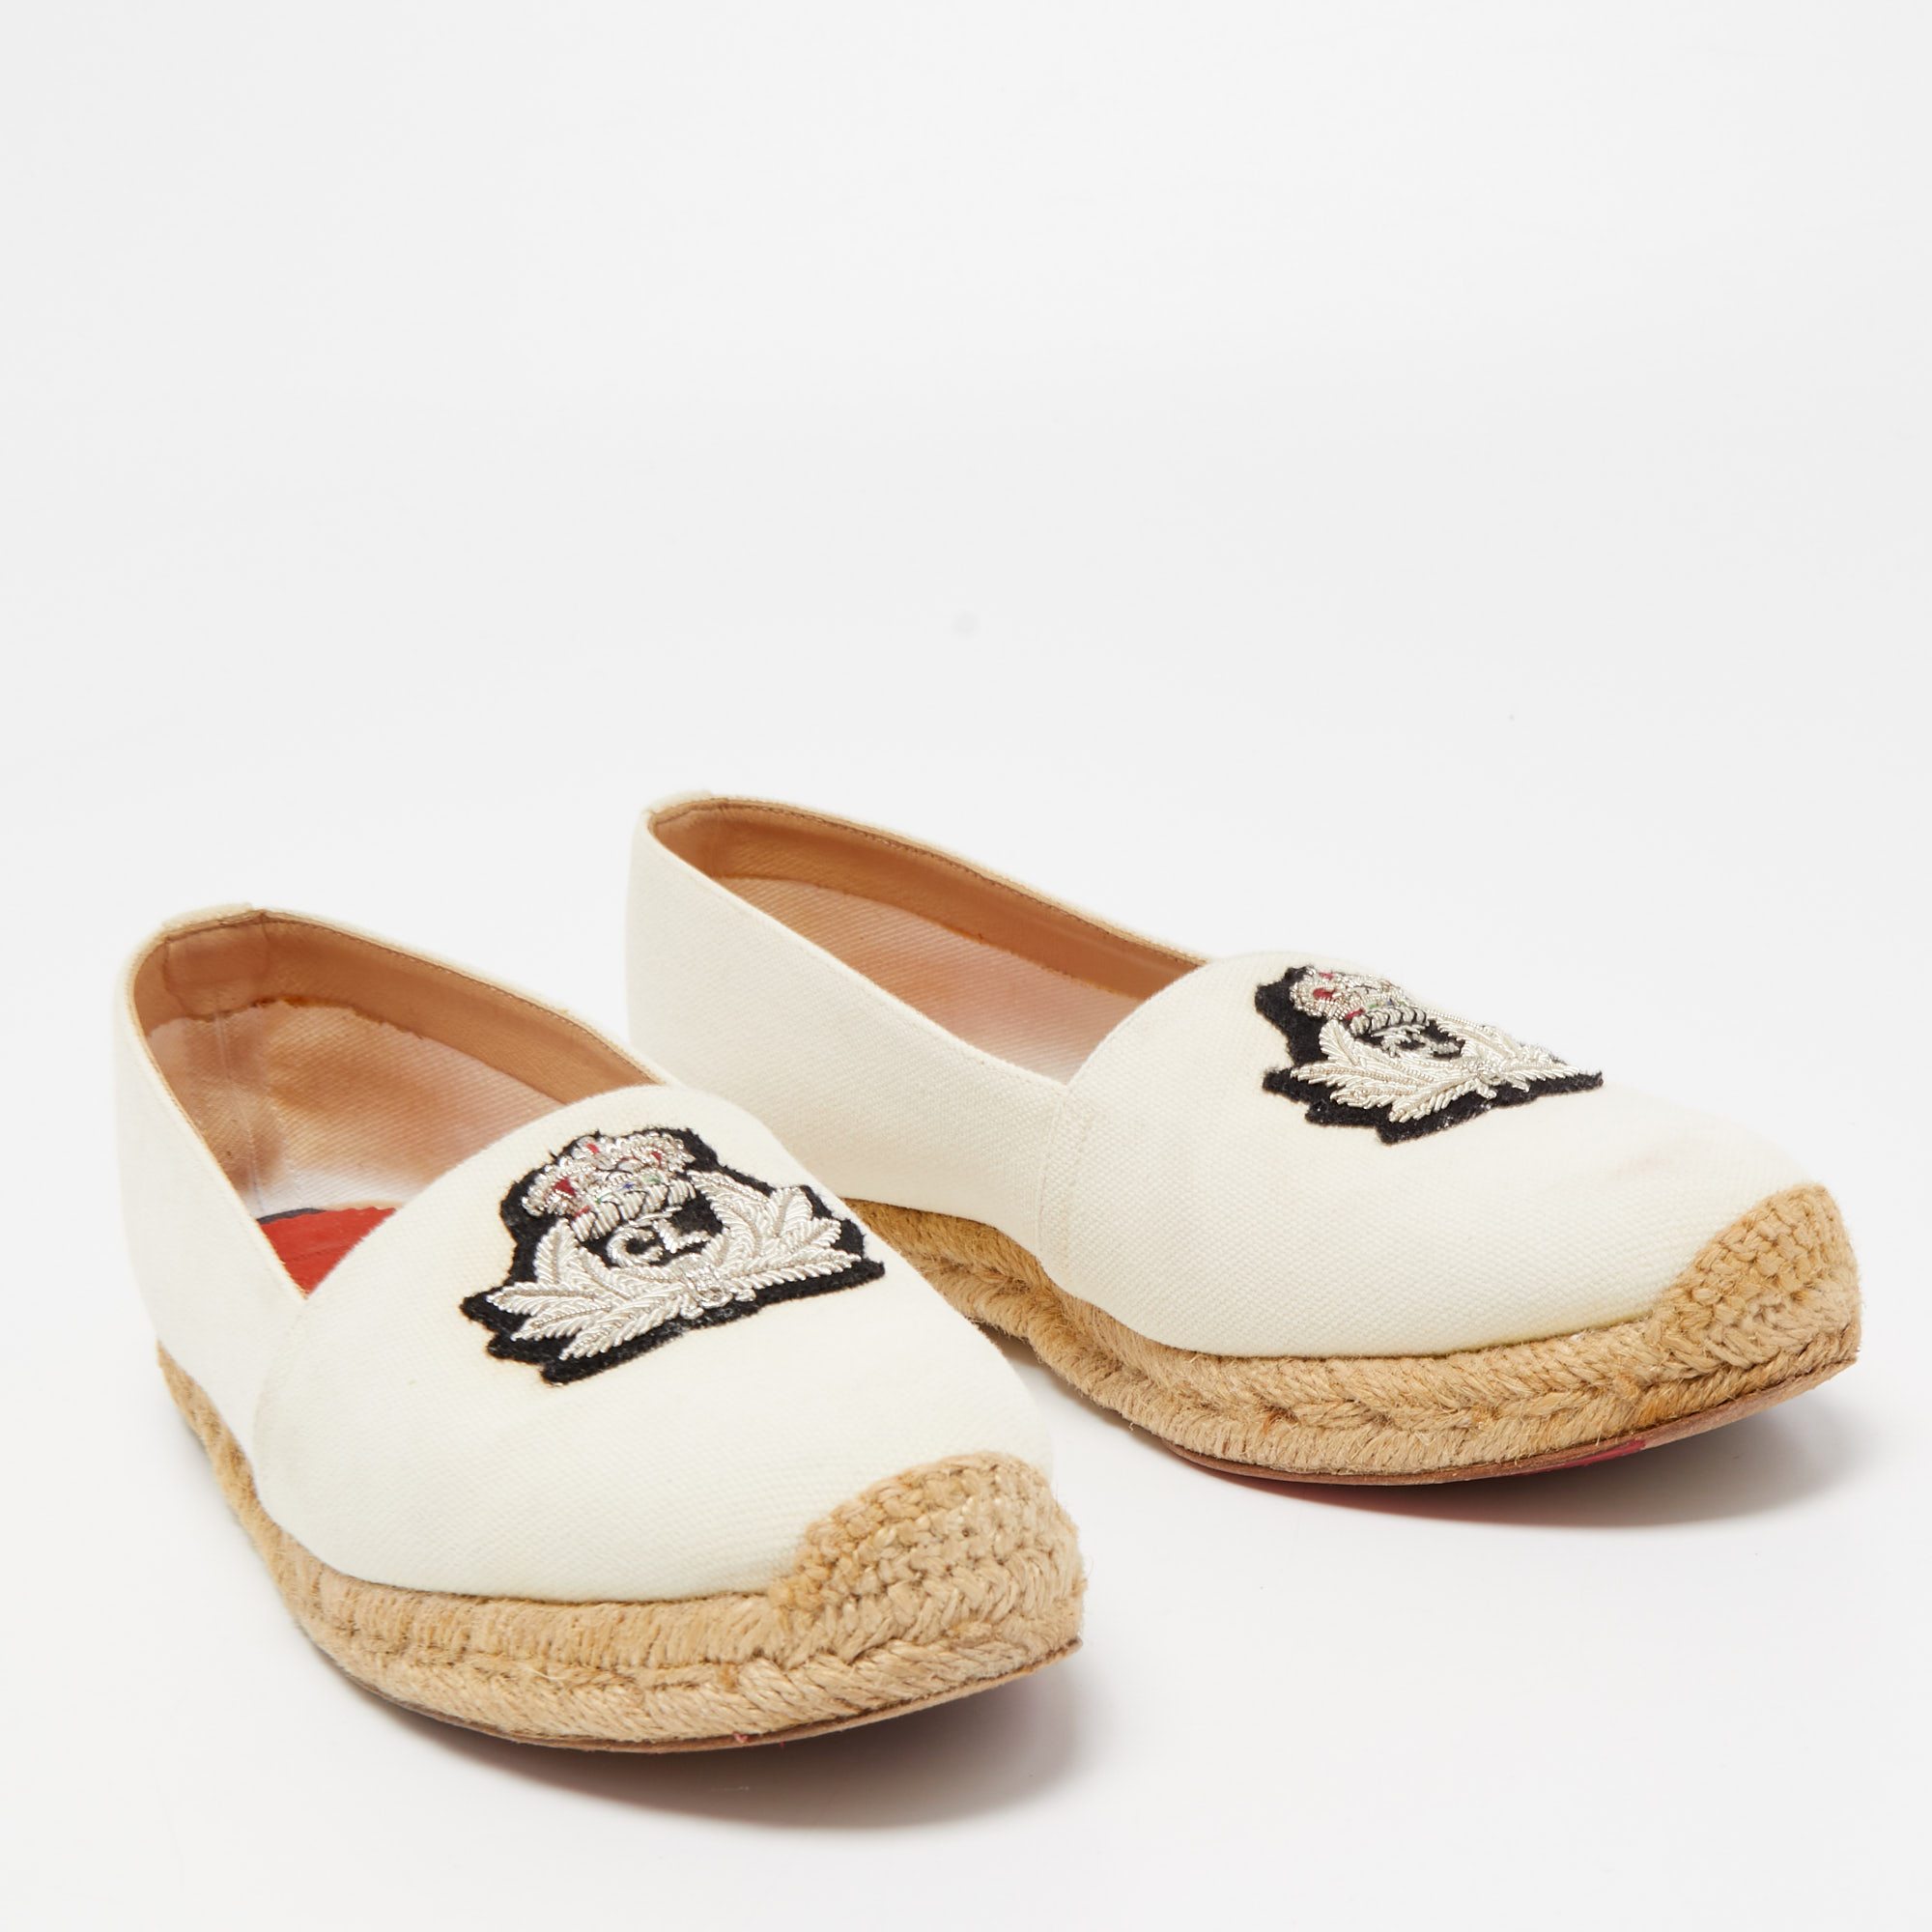 Christian Louboutin Off White Canvas Gala Embroidered Crest Espadrille Flats Size 36